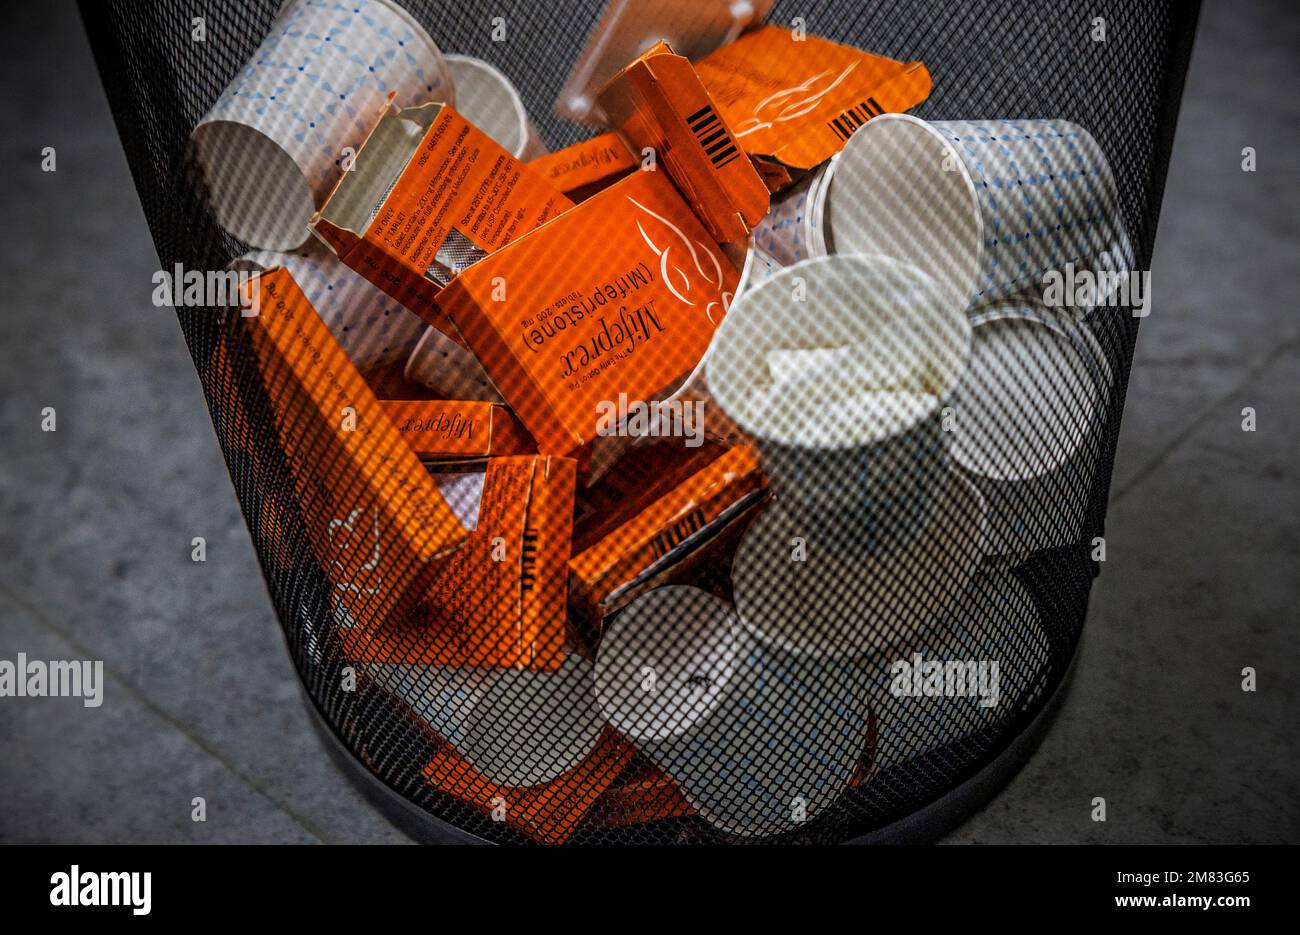 Used boxes of Mifepristone pills, the first drug used in a medical abortion, fill a trash at Alamo Women's Clinic in Albuquerque, New Mexico, U.S., January 11, 2023. REUTERS/Evleyn Hockstein Stock Photo